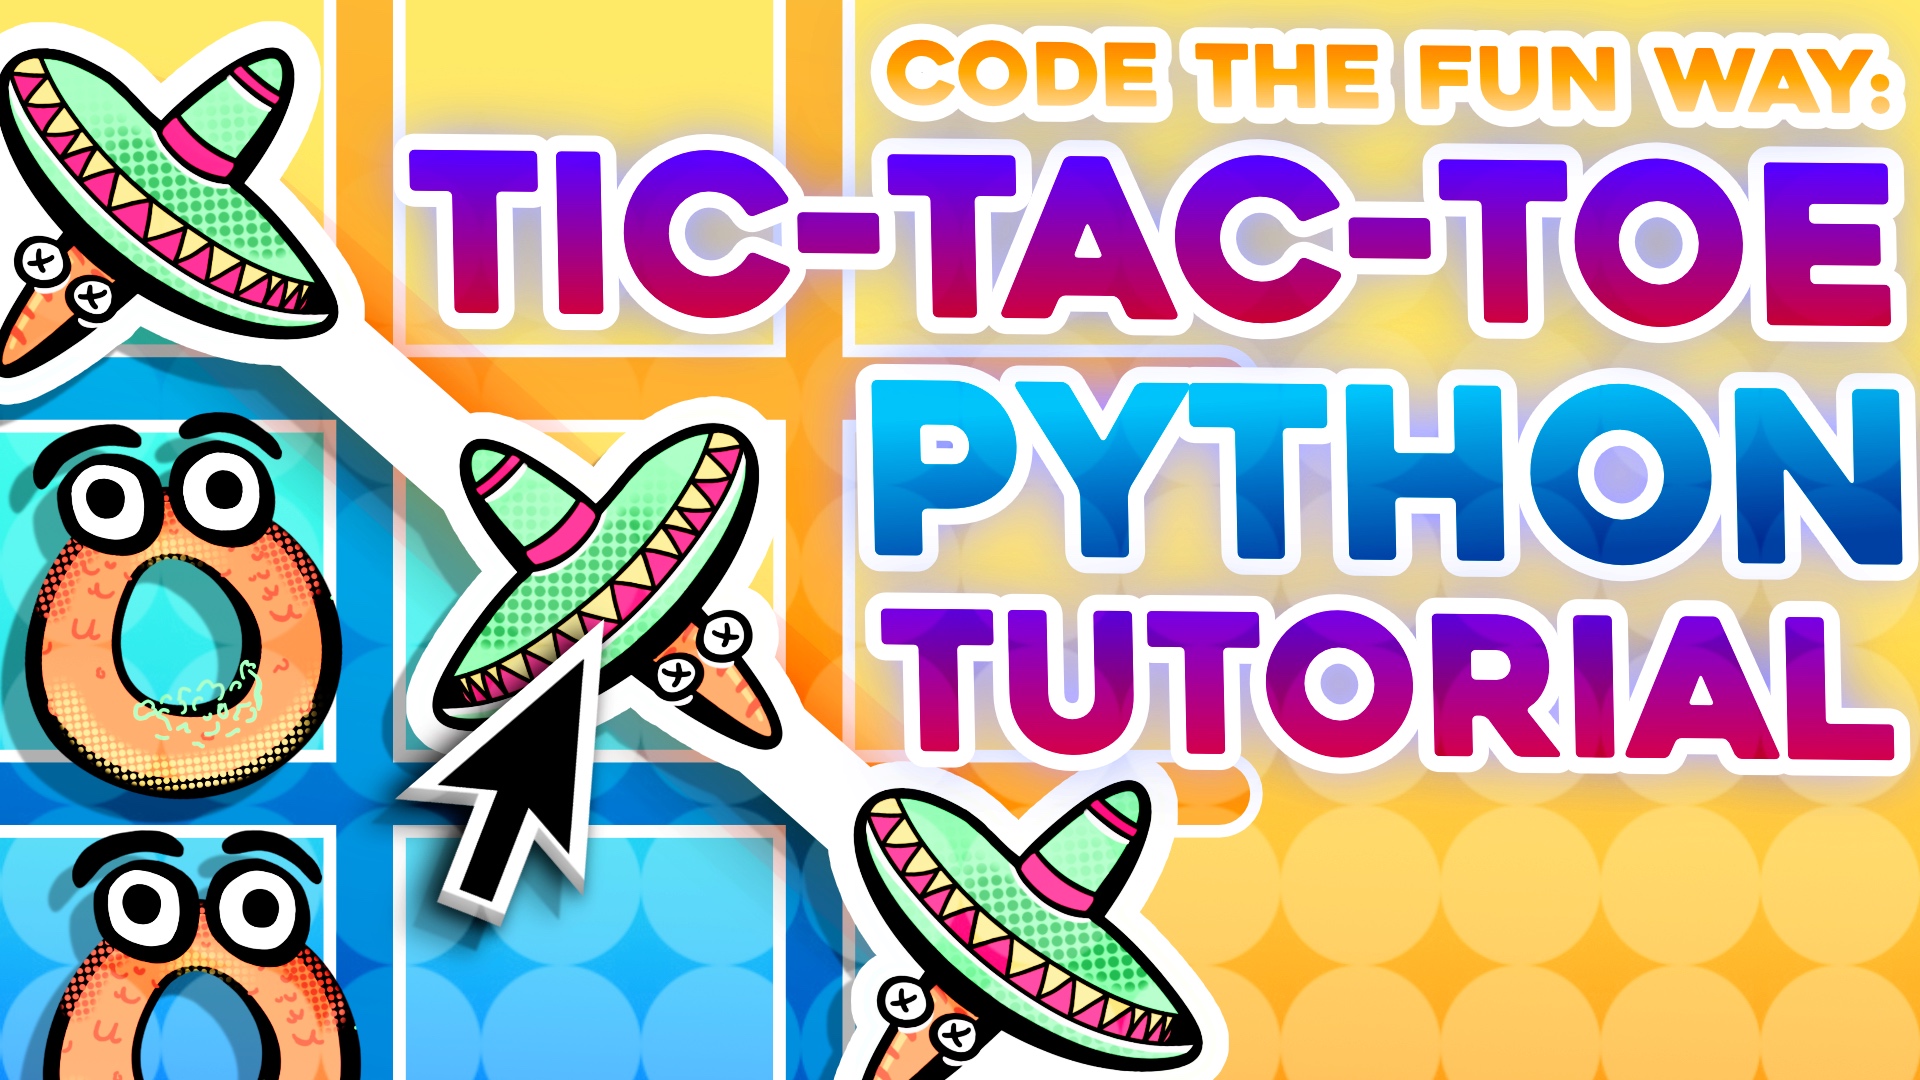 How to Make Tic Tac Toe in Python Tutorial